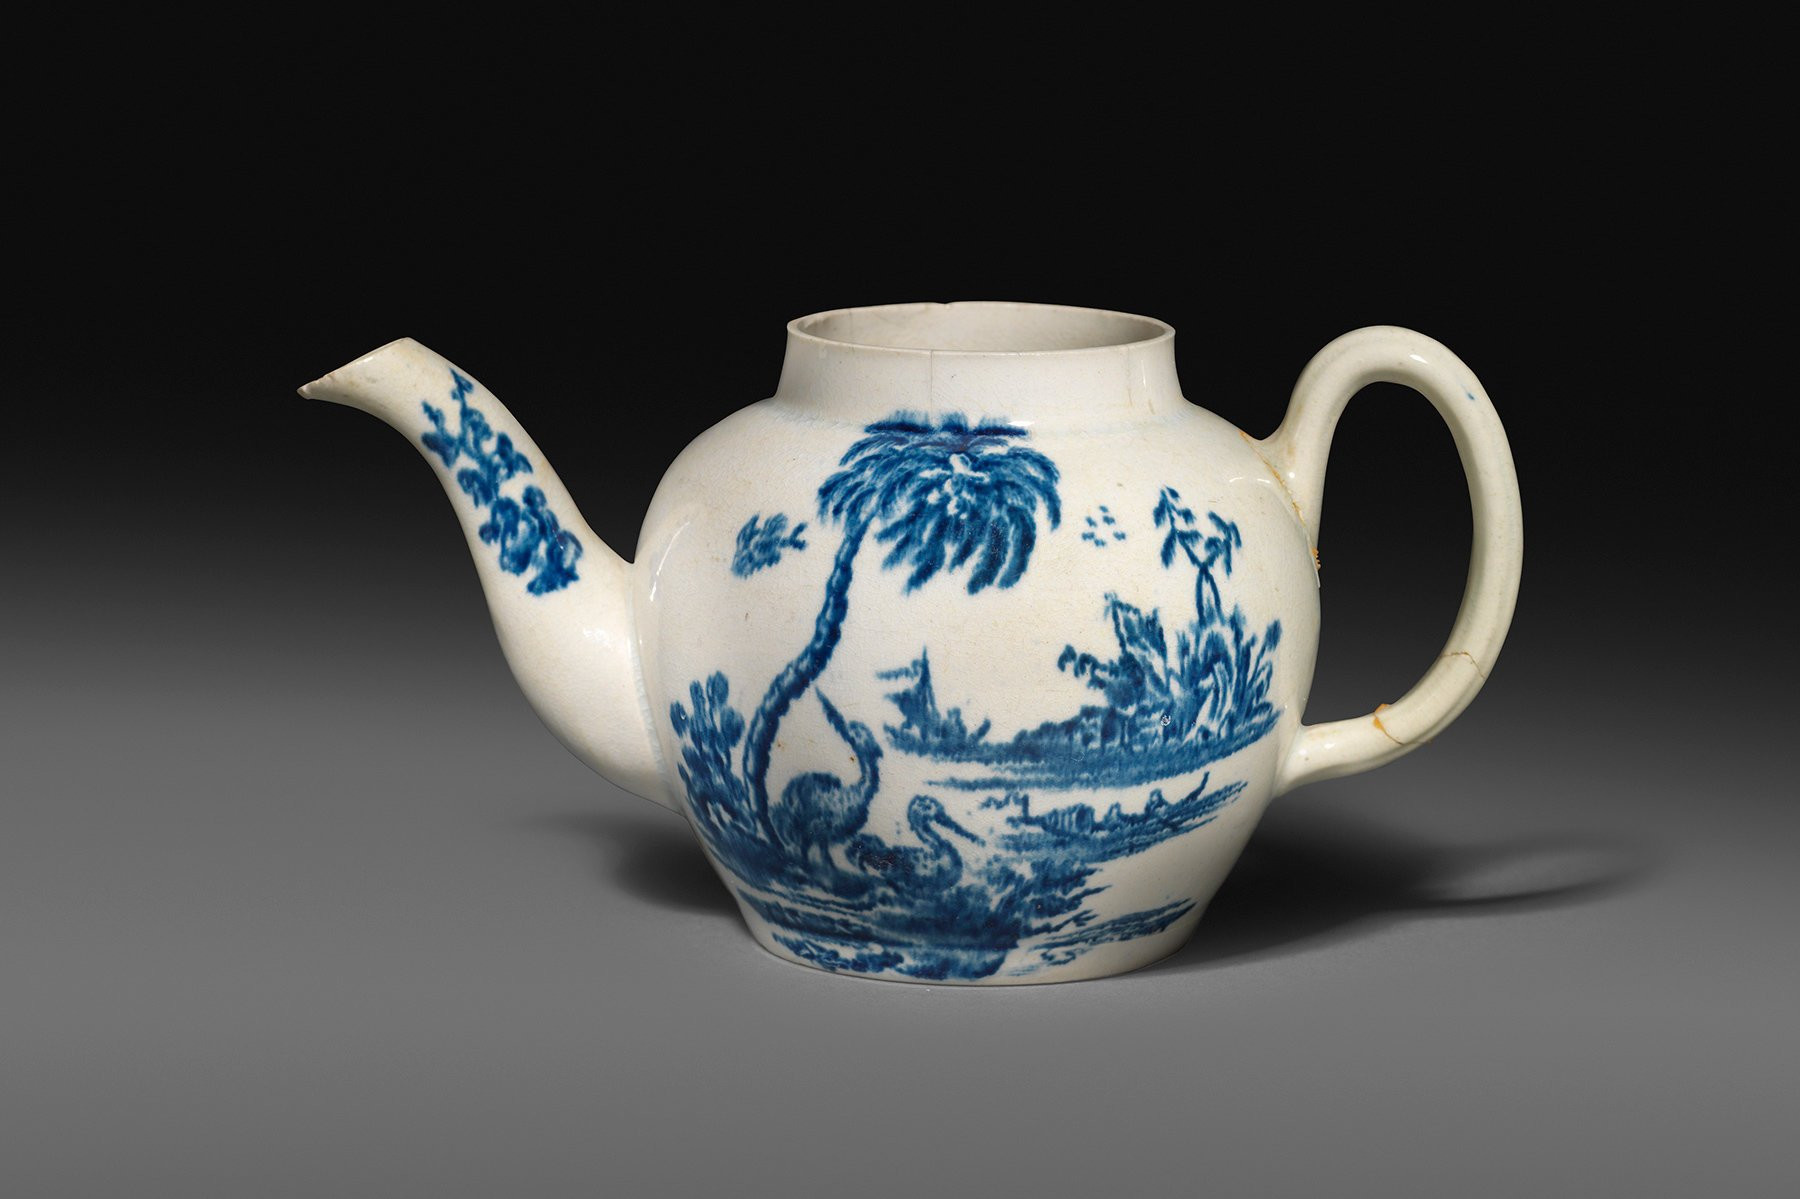 21 attractive Weller Pottery Vase Wild Rose 2024 free download weller pottery vase wild rose of bartlam john with regard to made before the boston tea party this teapot cost 800000